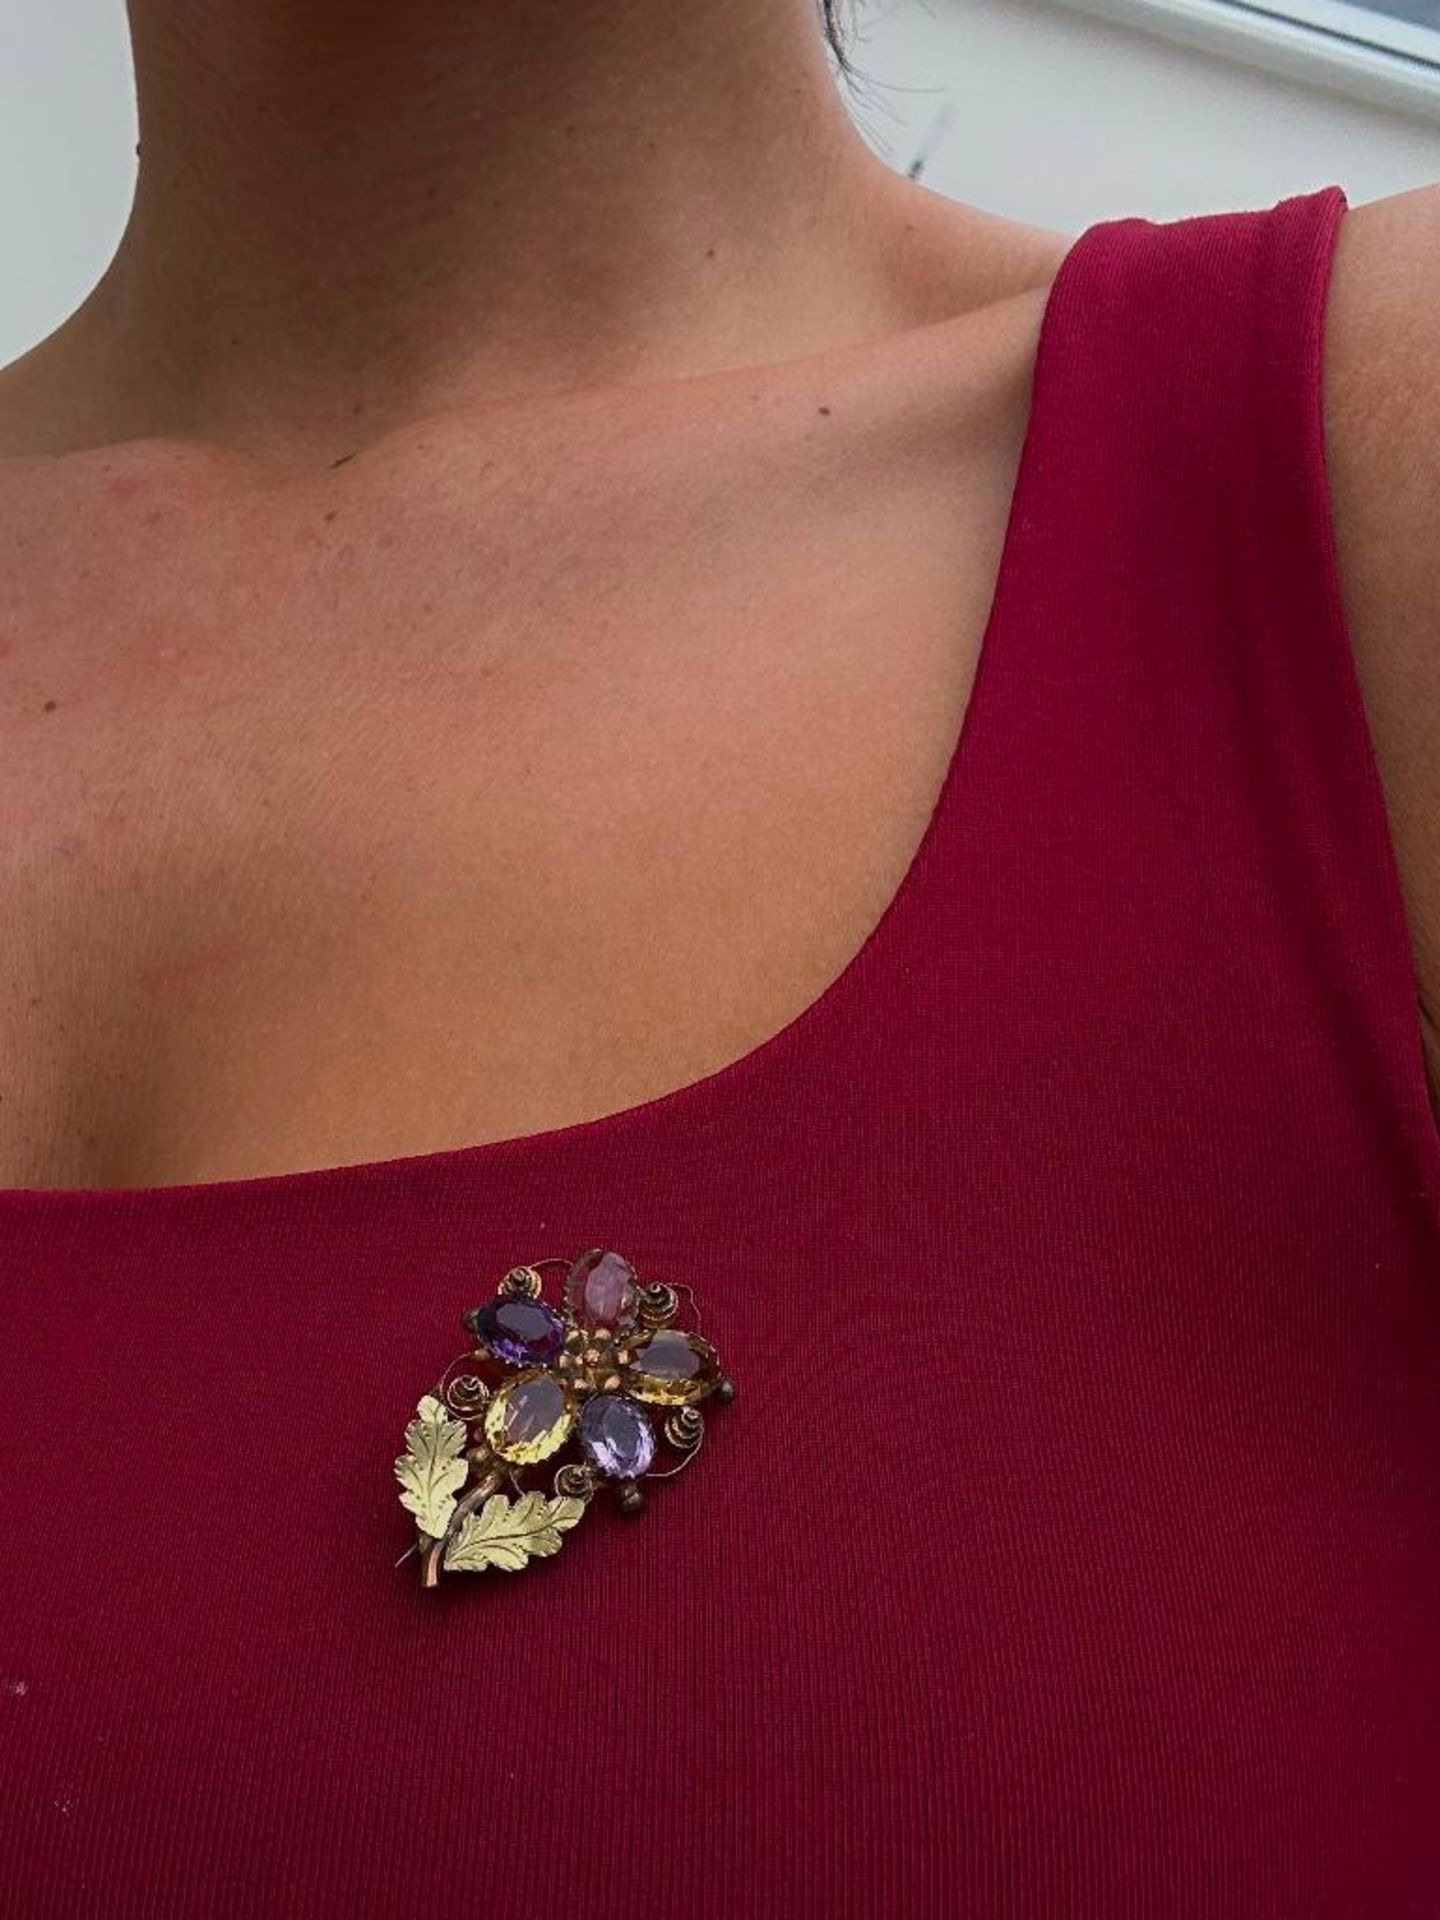 Georgian Era Large Citrine and Amethyst Flower Brooch in Gold - Image 2 of 4